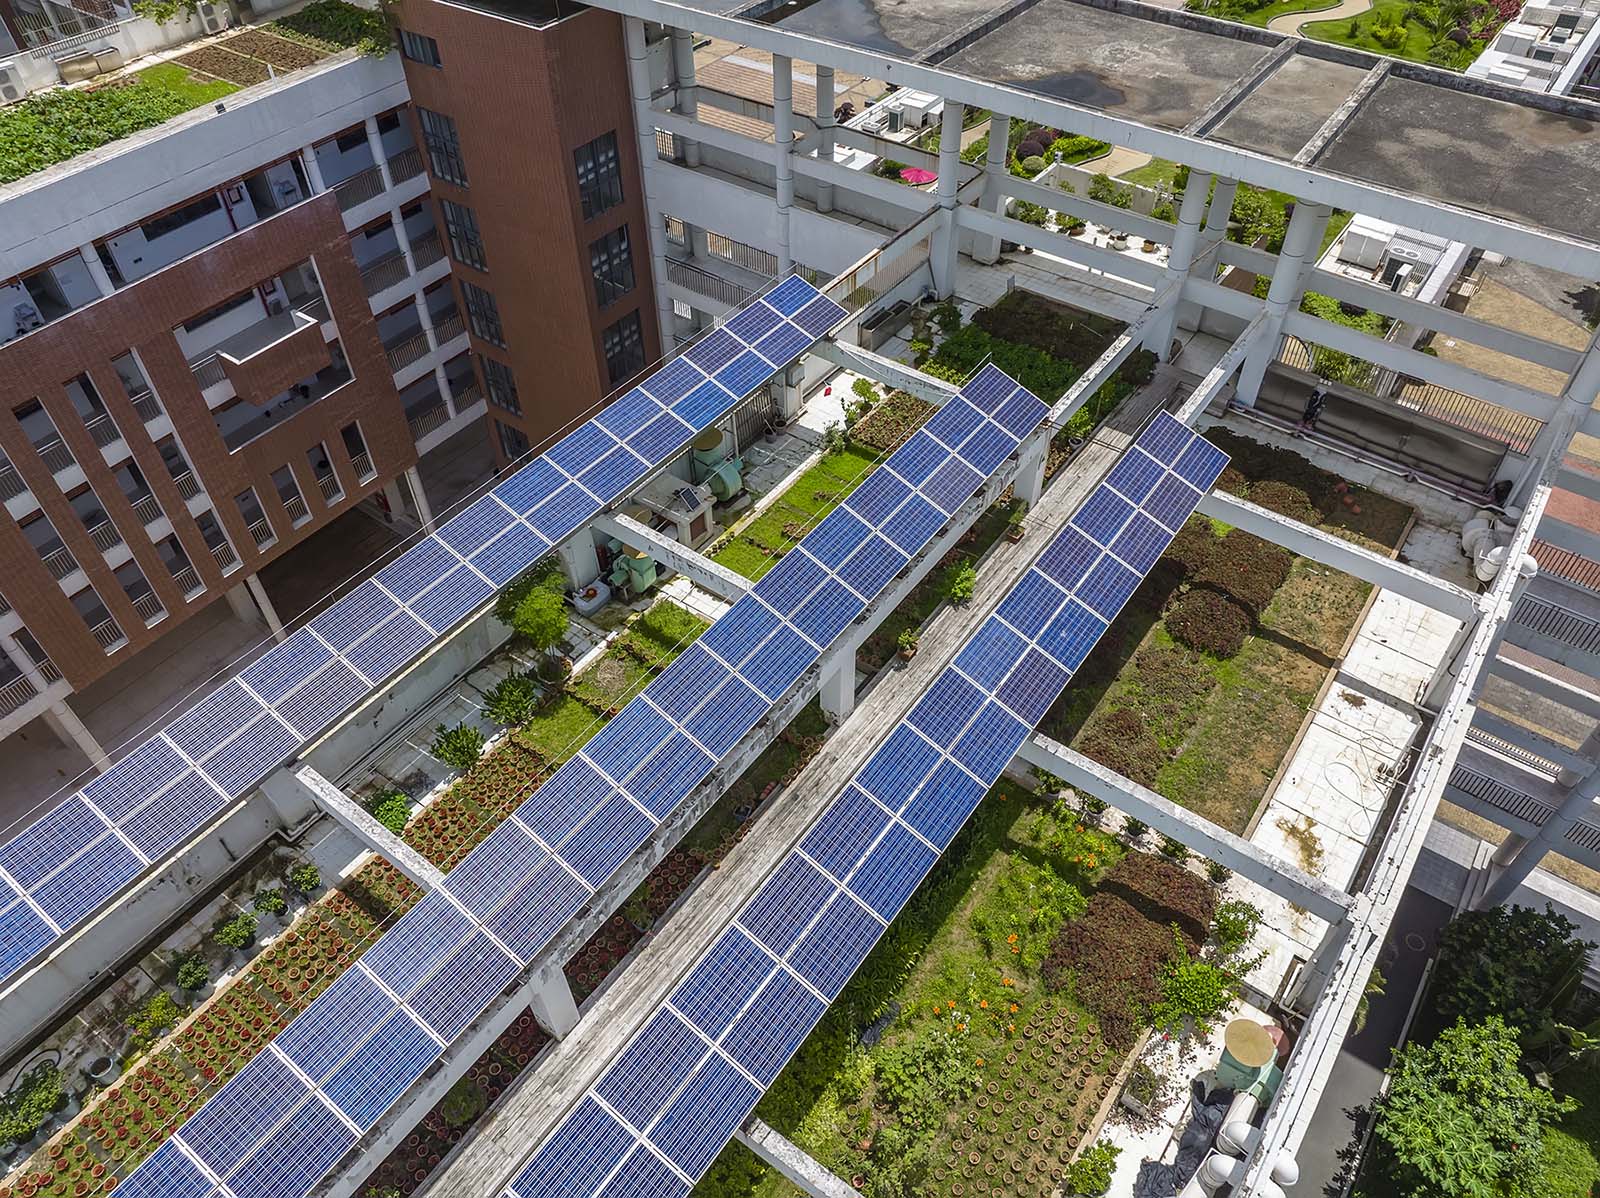 A complex of two buildings and a covered parking lot have roofscapes of solar panels and gardens.